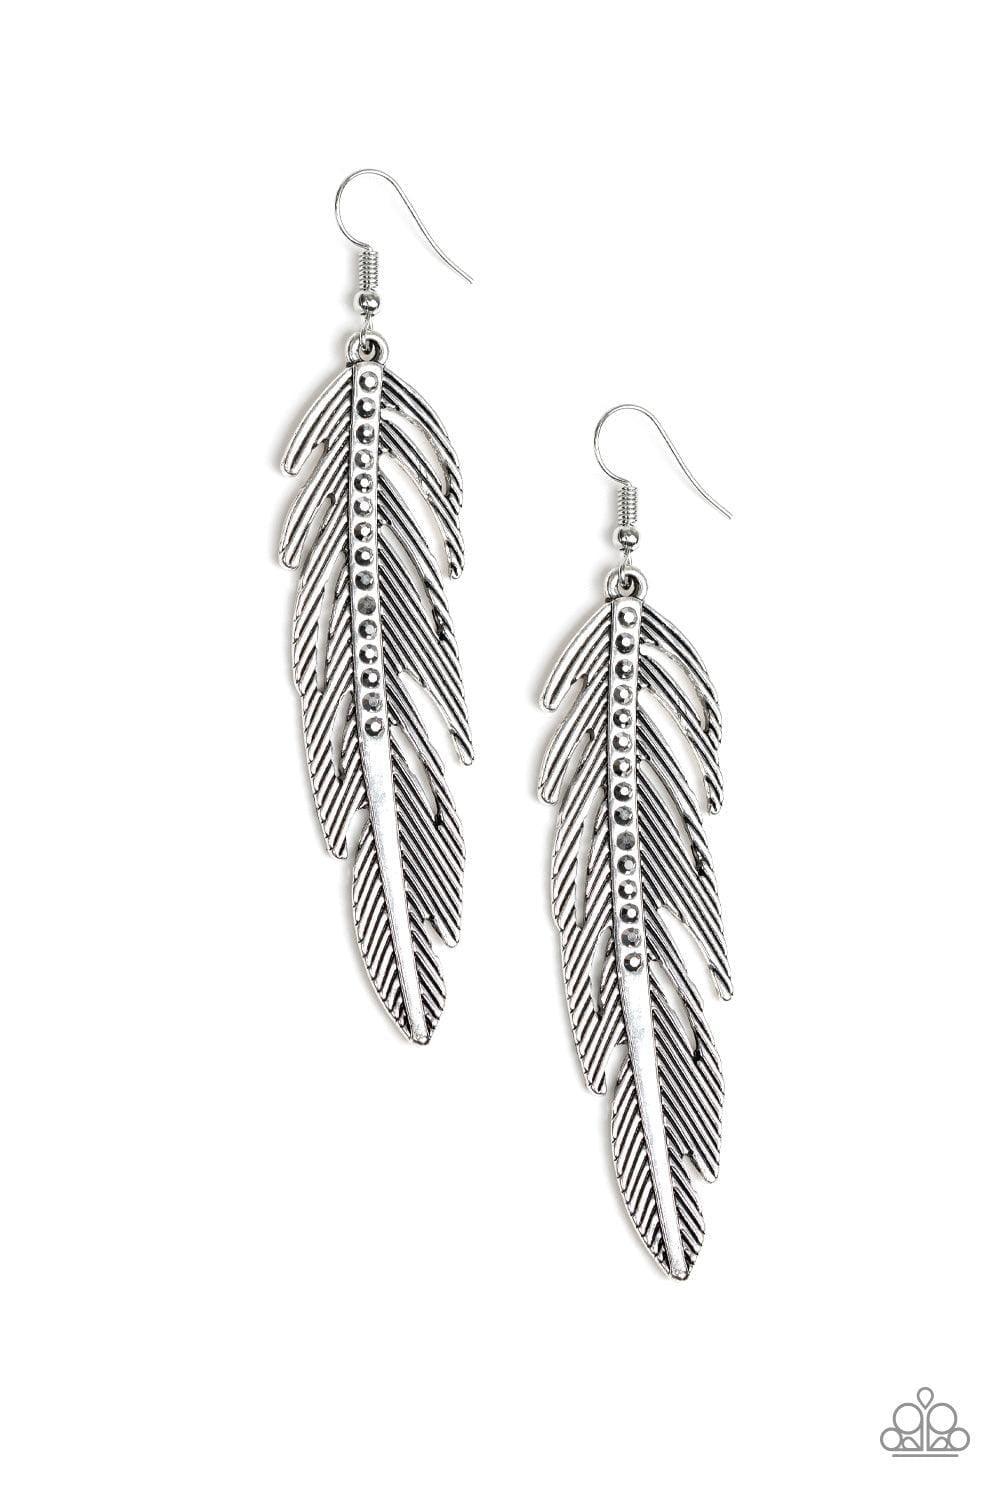 Paparazzi Accessories - Give Me a Roost - Silver Earring - Bling by JessieK